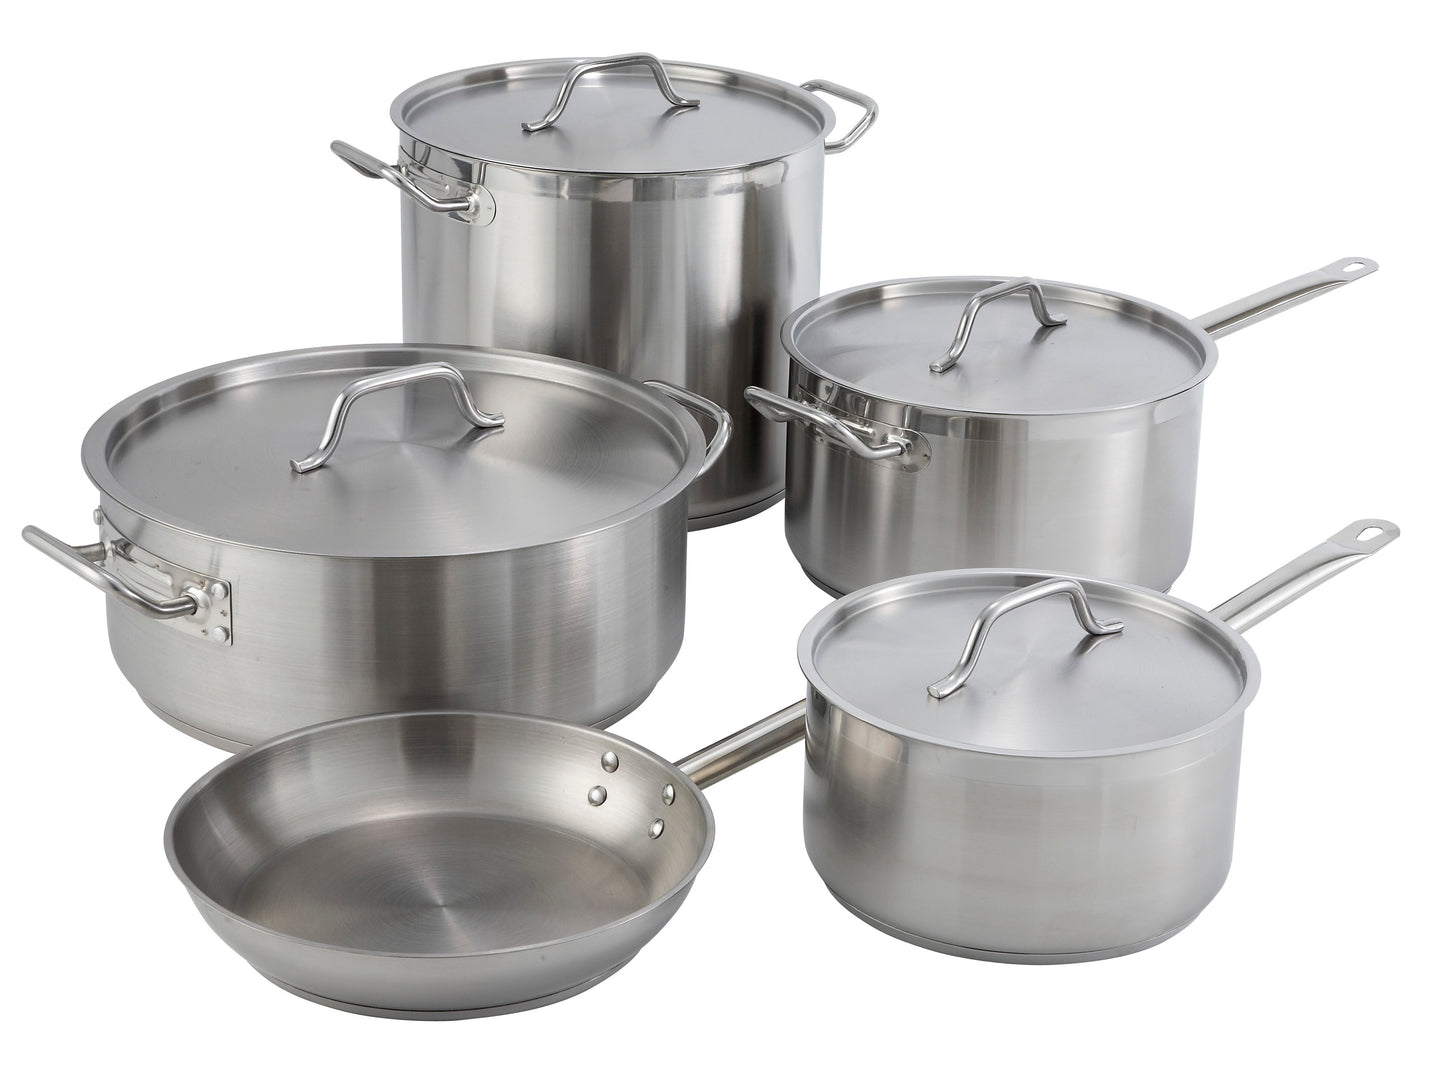 SST-32 - Stainless Steel Stock Pot with Cover - 32 Quart